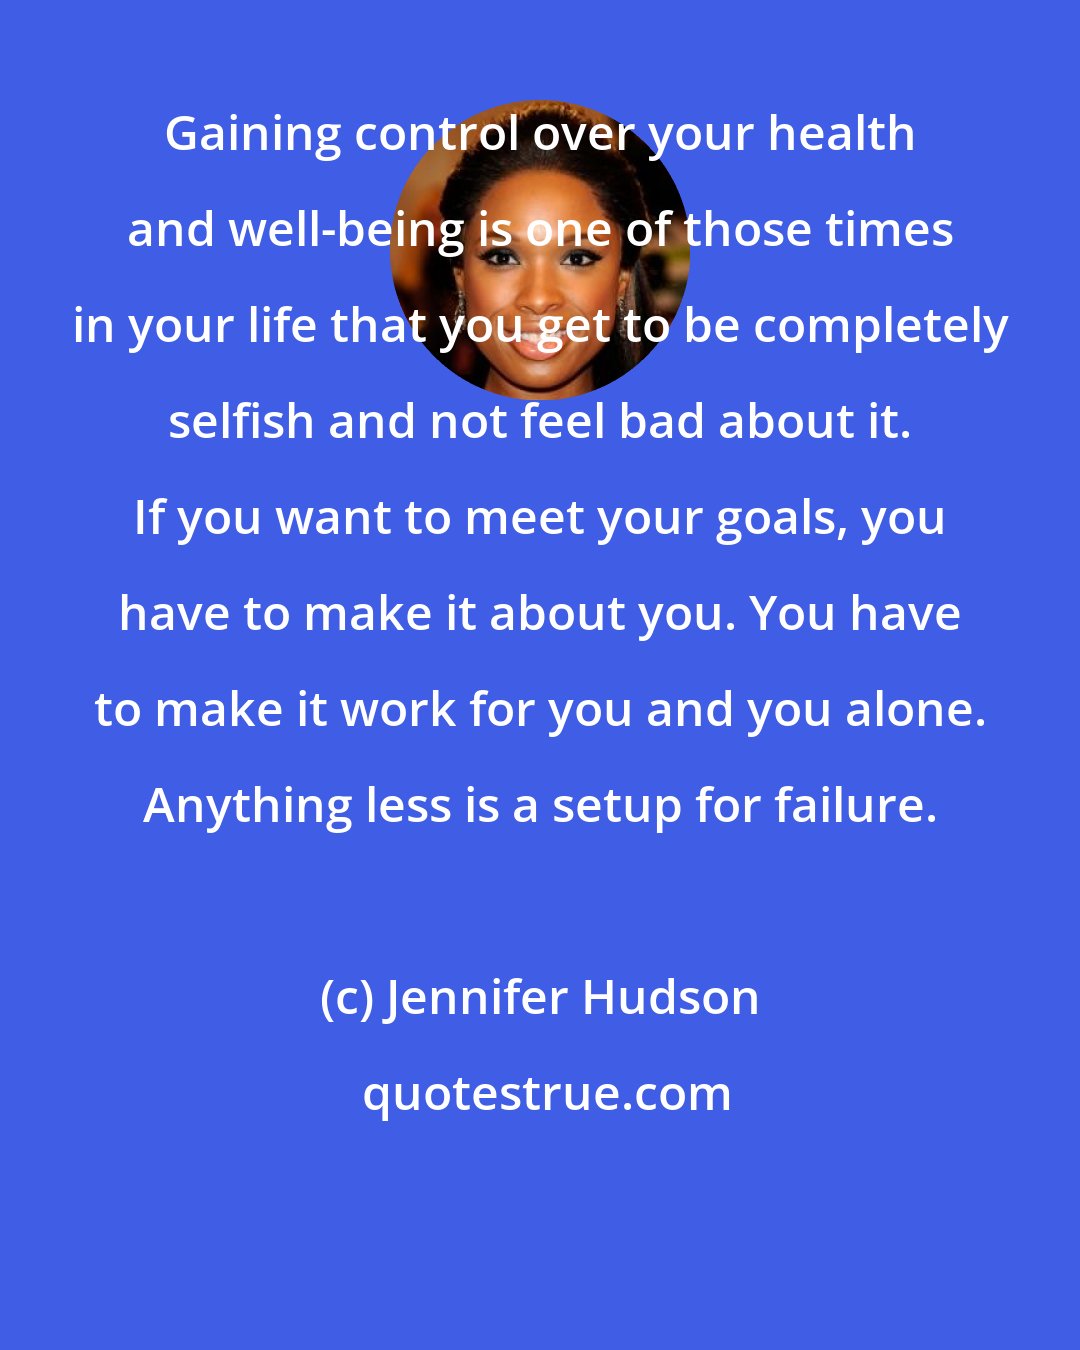 Jennifer Hudson: Gaining control over your health and well-being is one of those times in your life that you get to be completely selfish and not feel bad about it. If you want to meet your goals, you have to make it about you. You have to make it work for you and you alone. Anything less is a setup for failure.